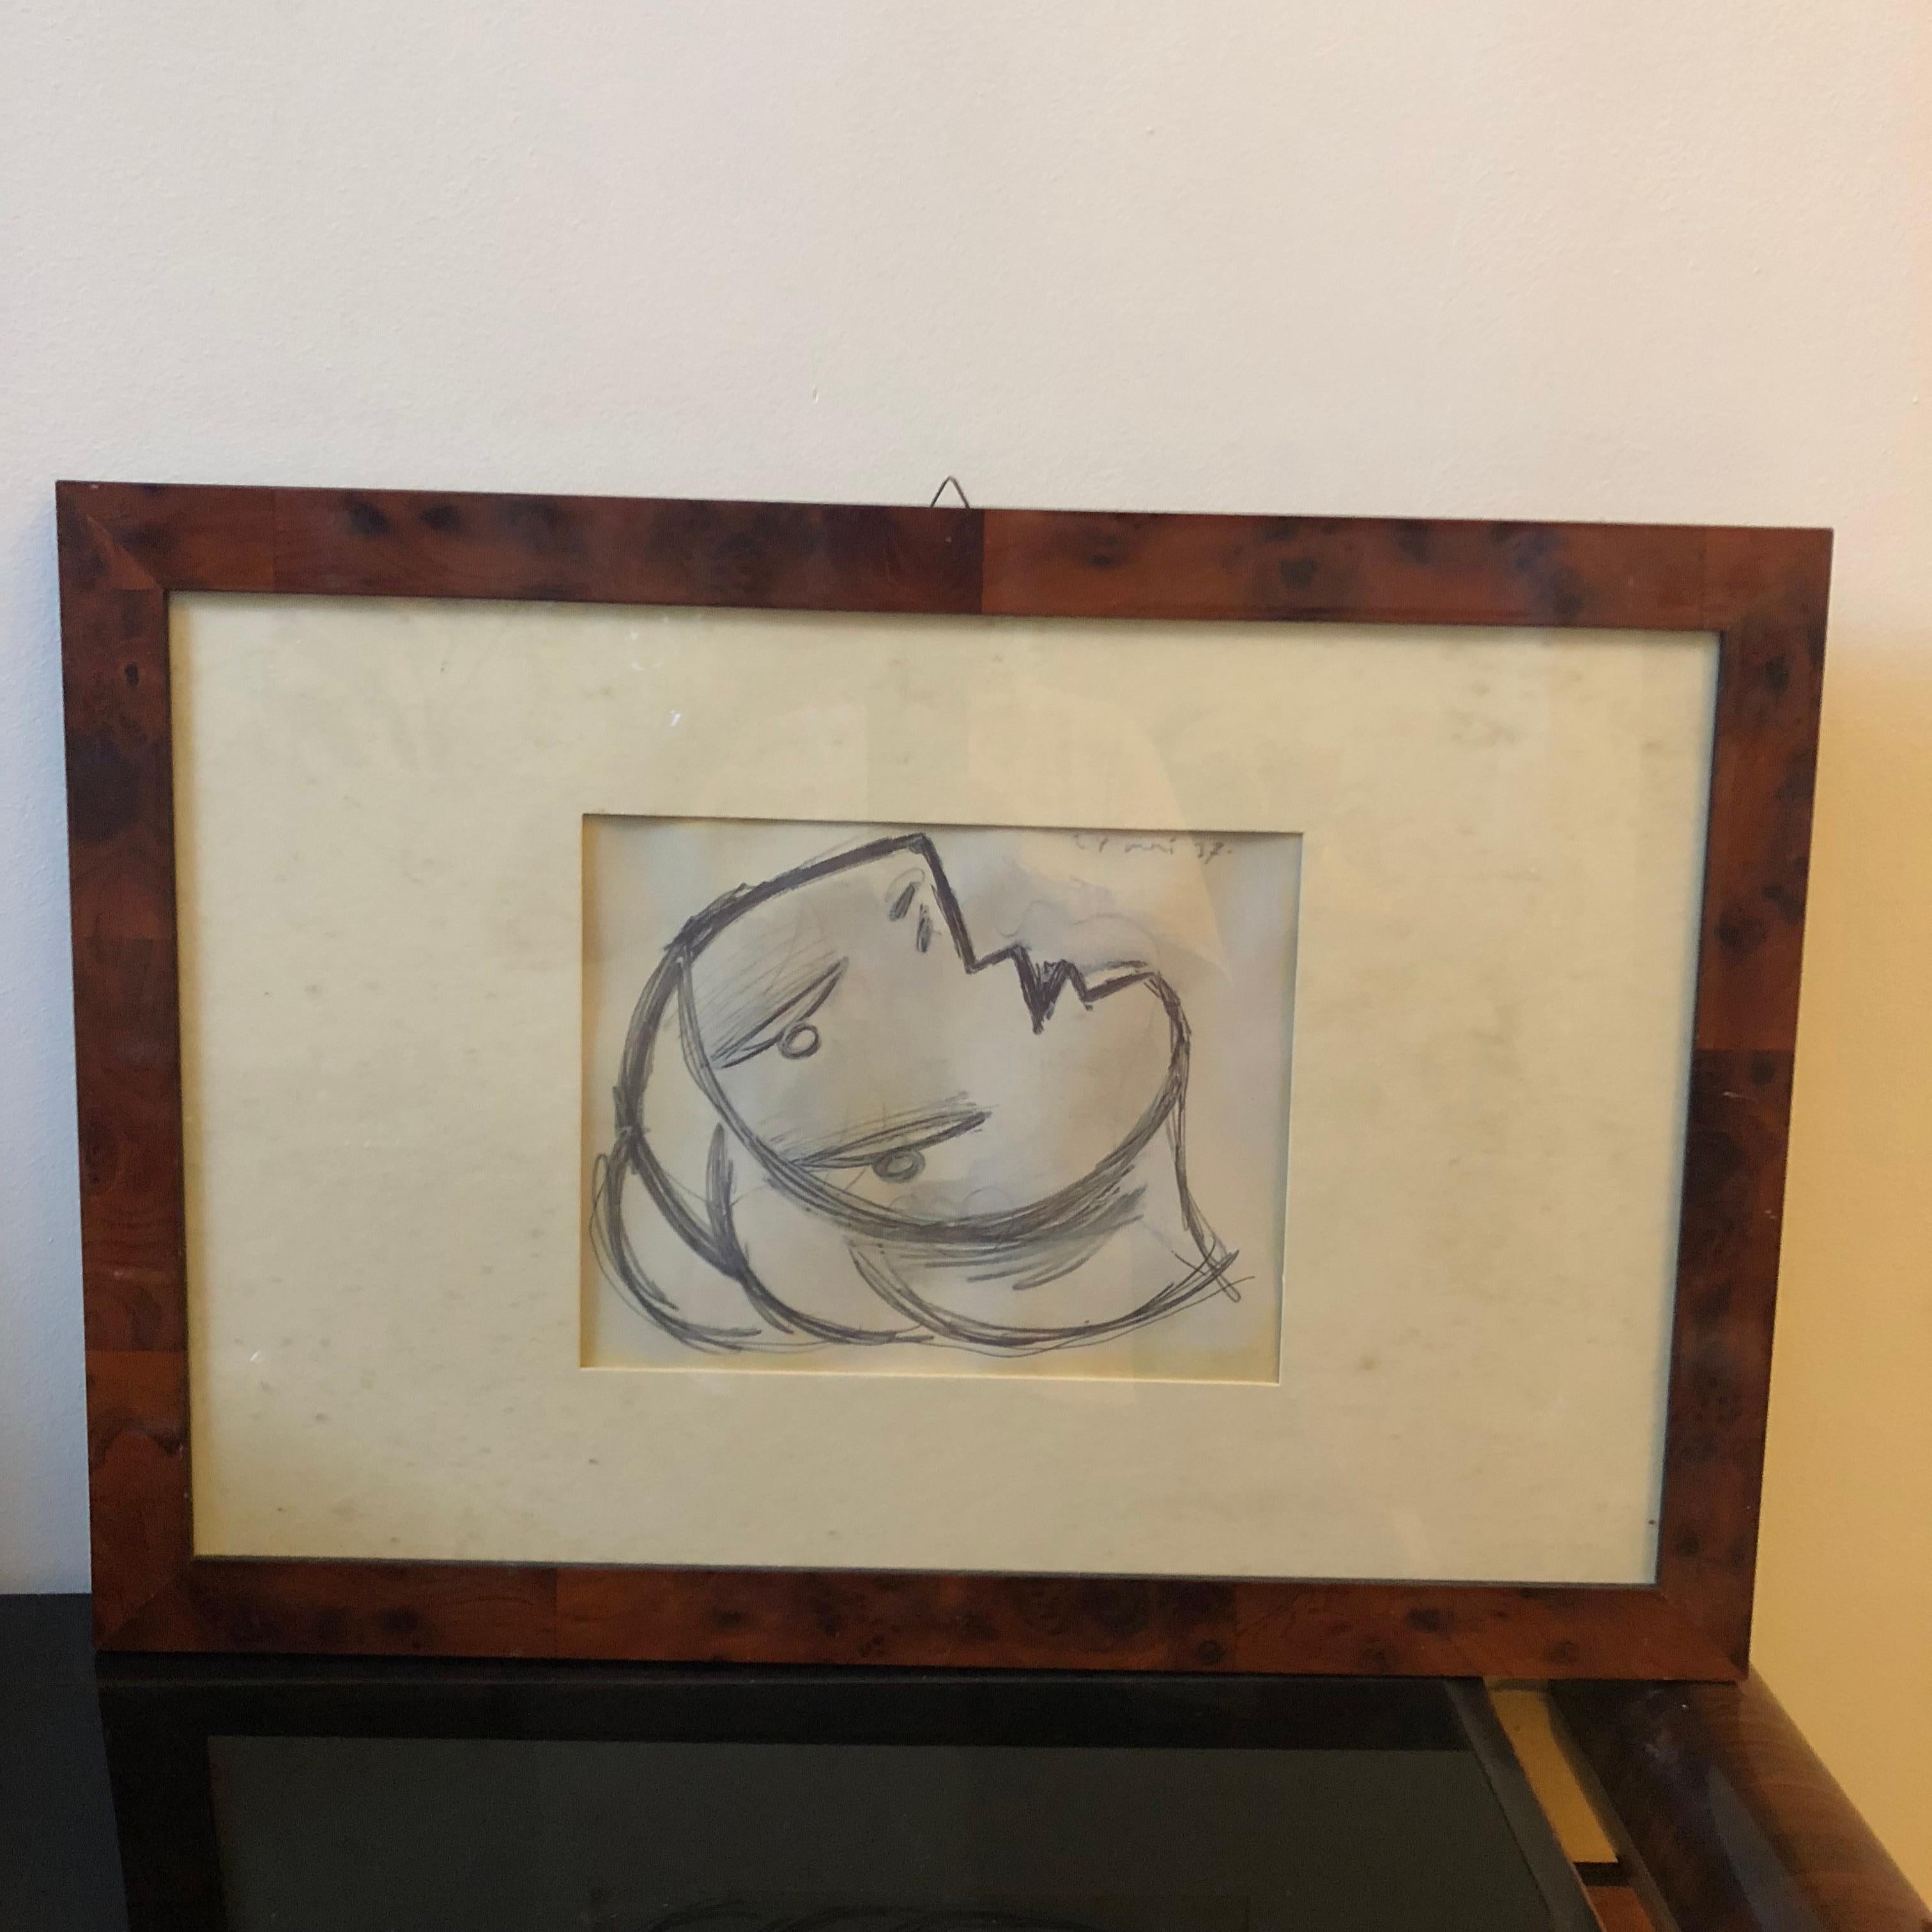 Five anastatic copies of Picasso's Guernica sketches in a walnut-root frame, good conditions overall, realized in the 1970s.